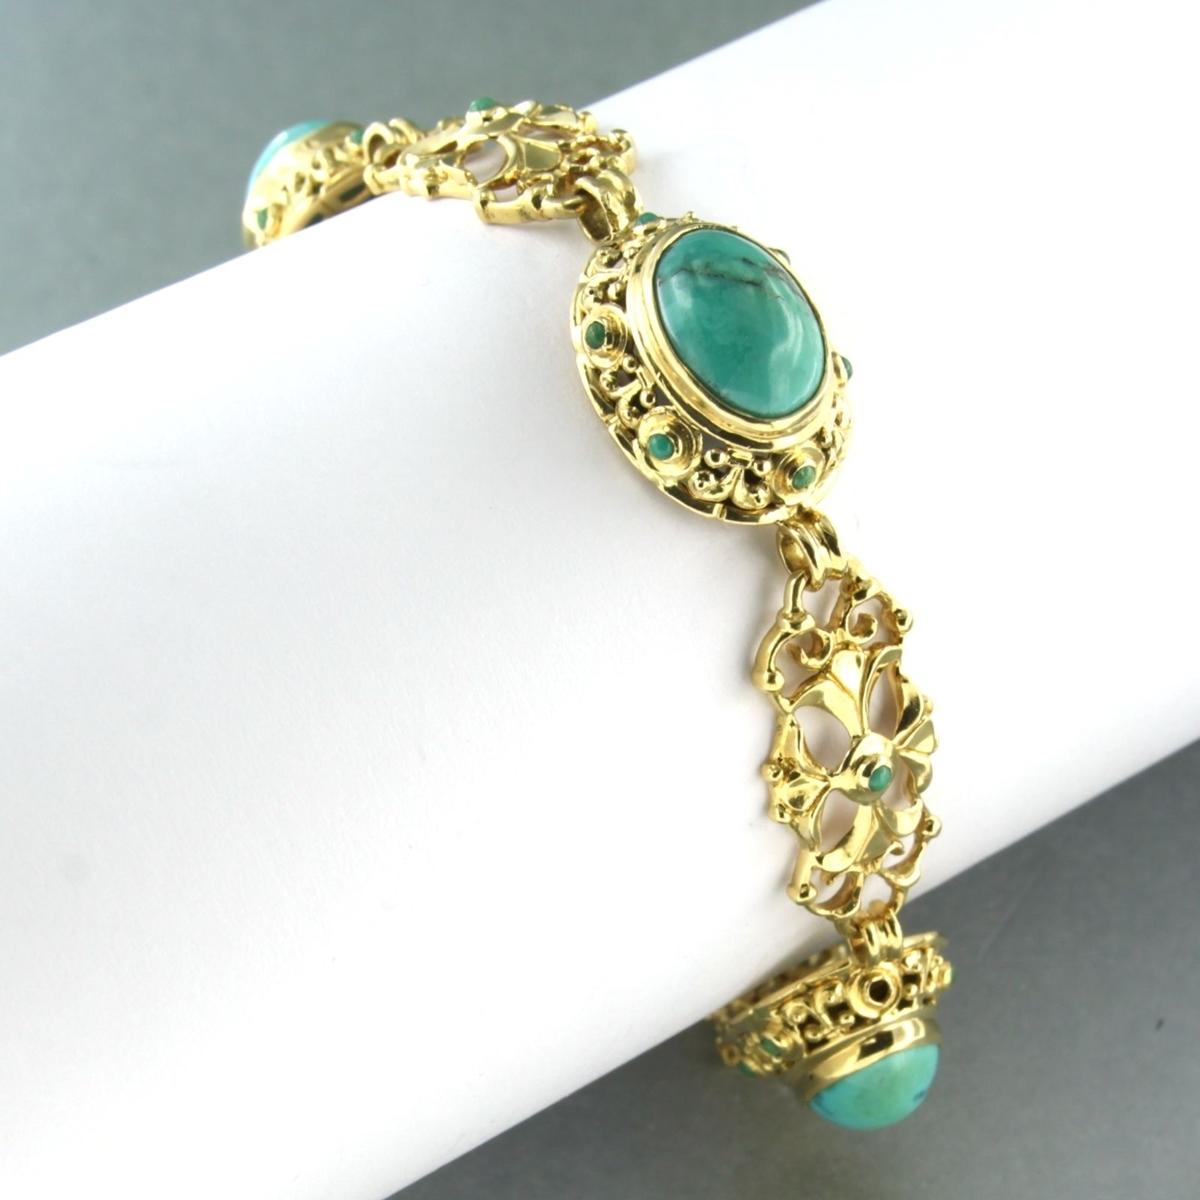 18k yellow gold bracelet set with turquoise - 18 cm long

detailed description:

The bracelet is approximately 18 cm long and 1.4 cm wide, and has a safety chain

Total weight bracelet: 24.3 grams

Occupied with :

- 4 x 1.1 cm x 0.8 cm oval